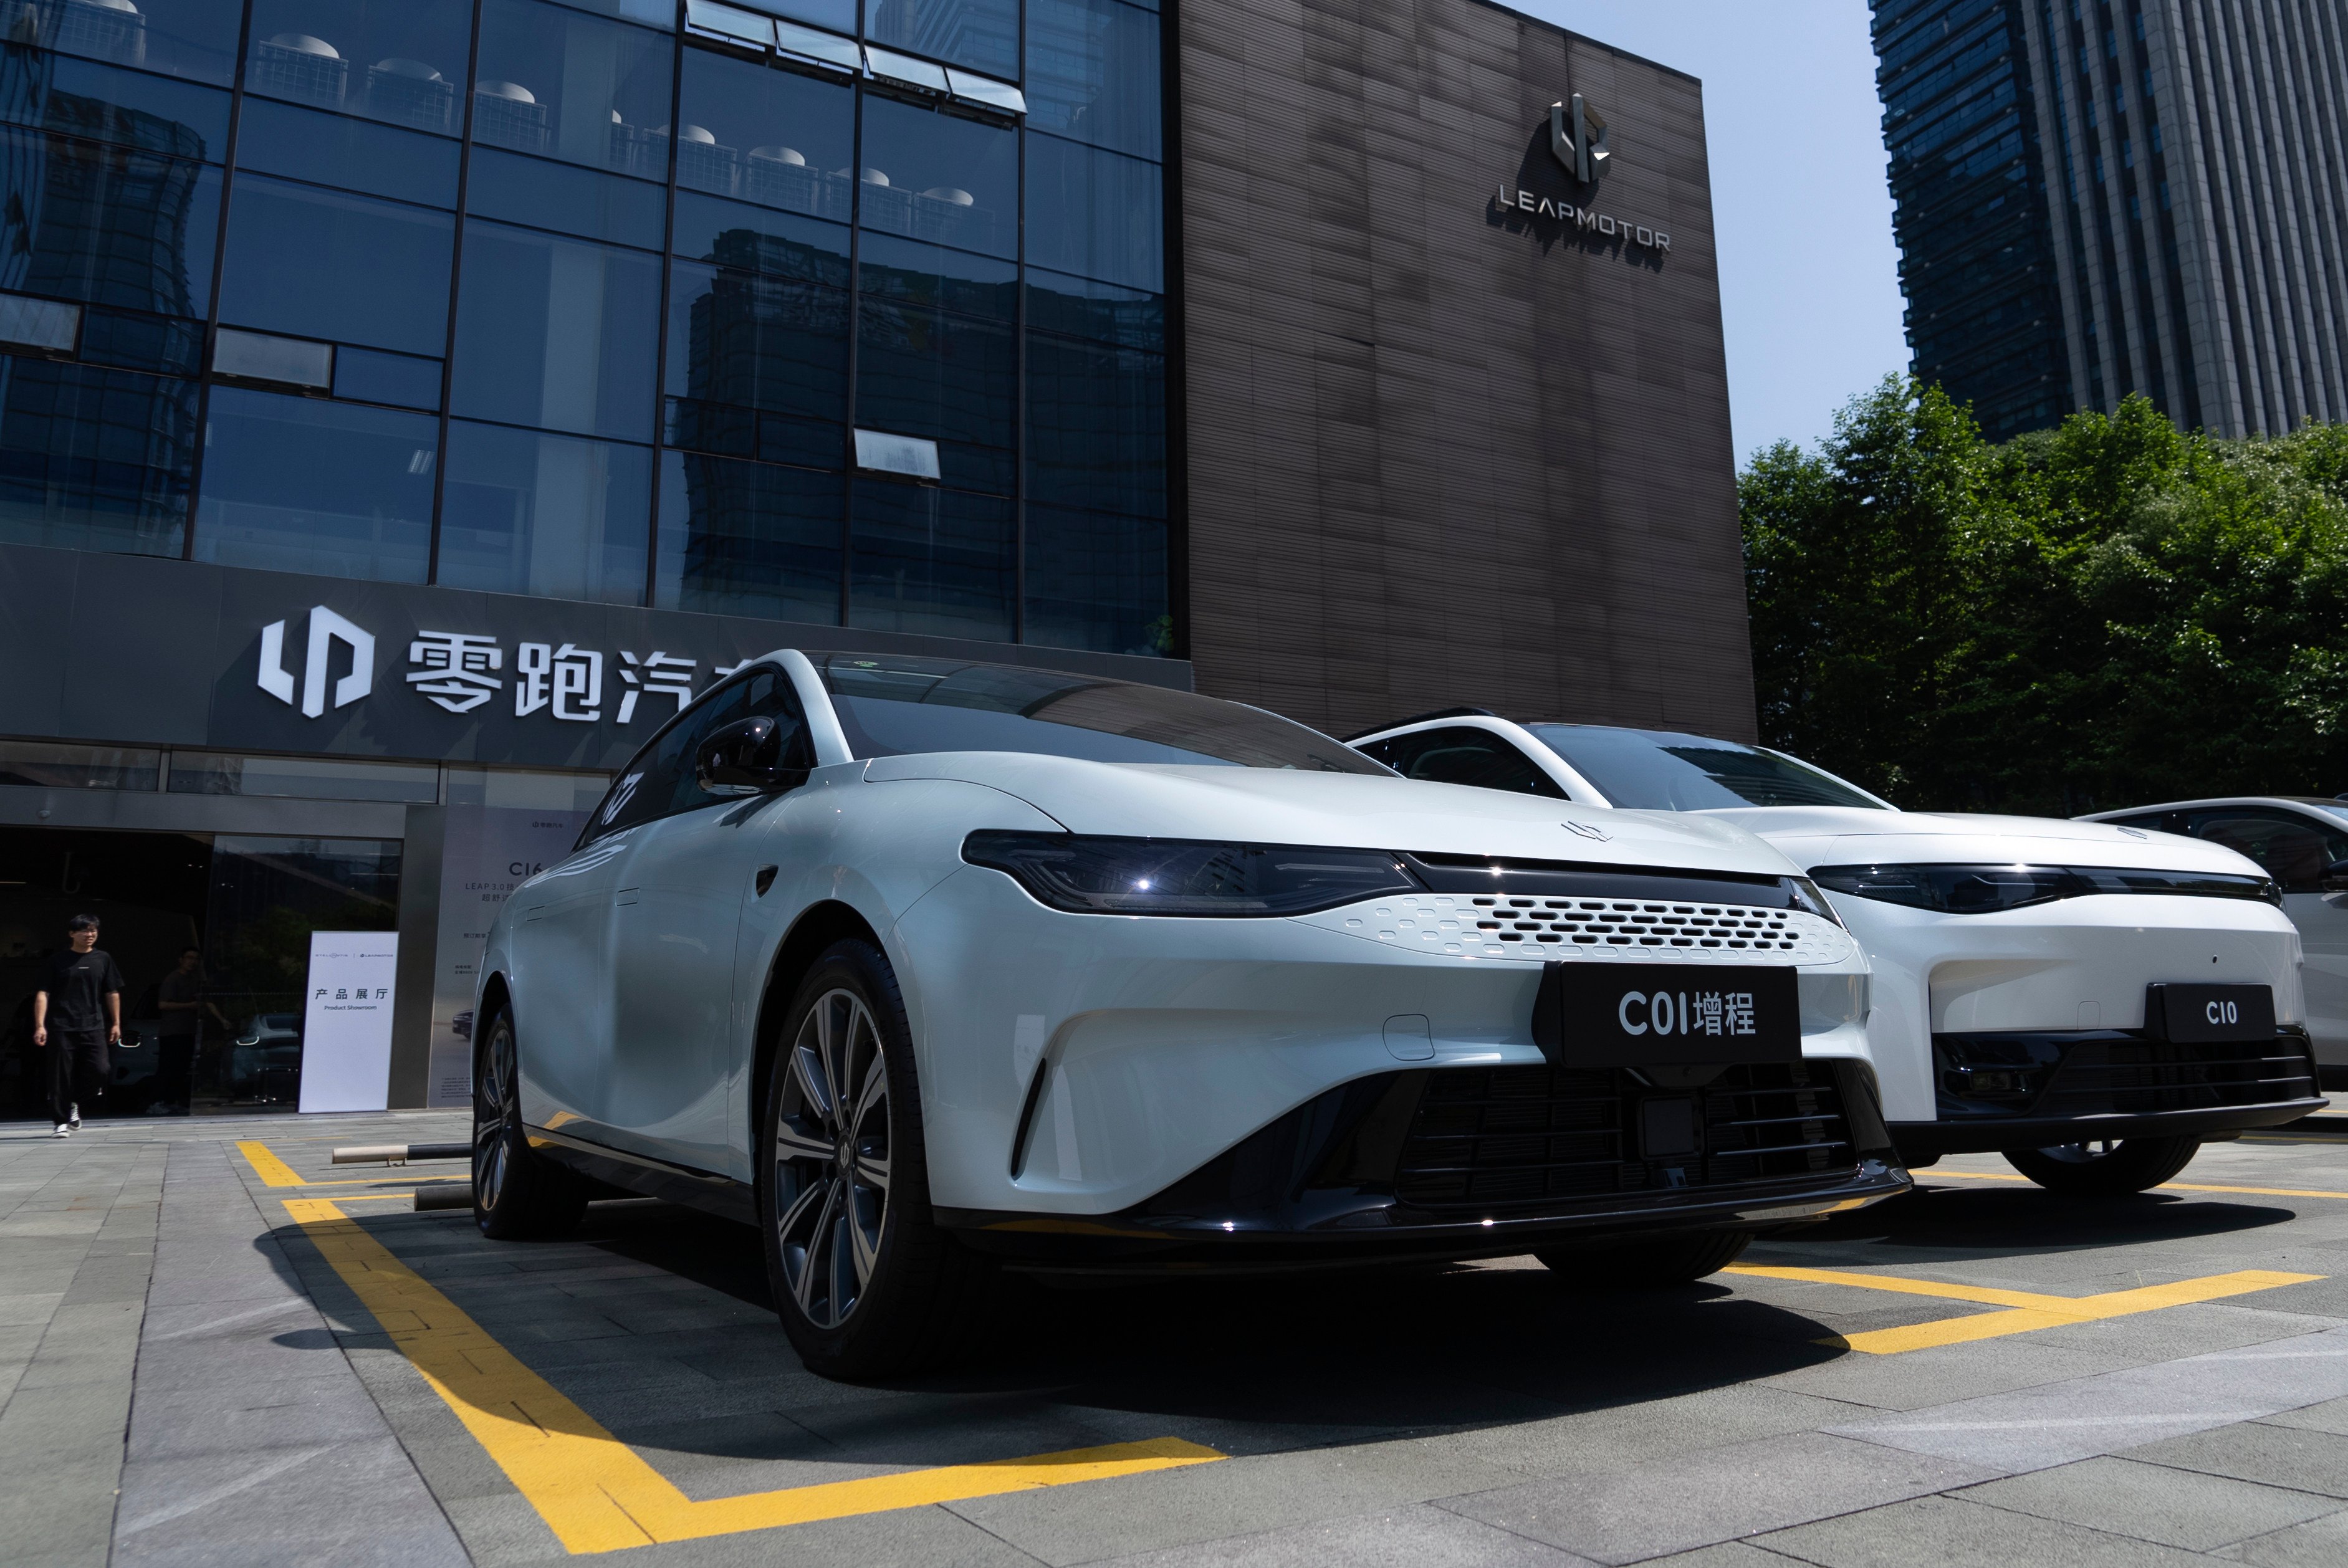 Electric vehicles are parked outside a showroom in Hangzhou, eastern China’s Zhejiang province. Photo: AP